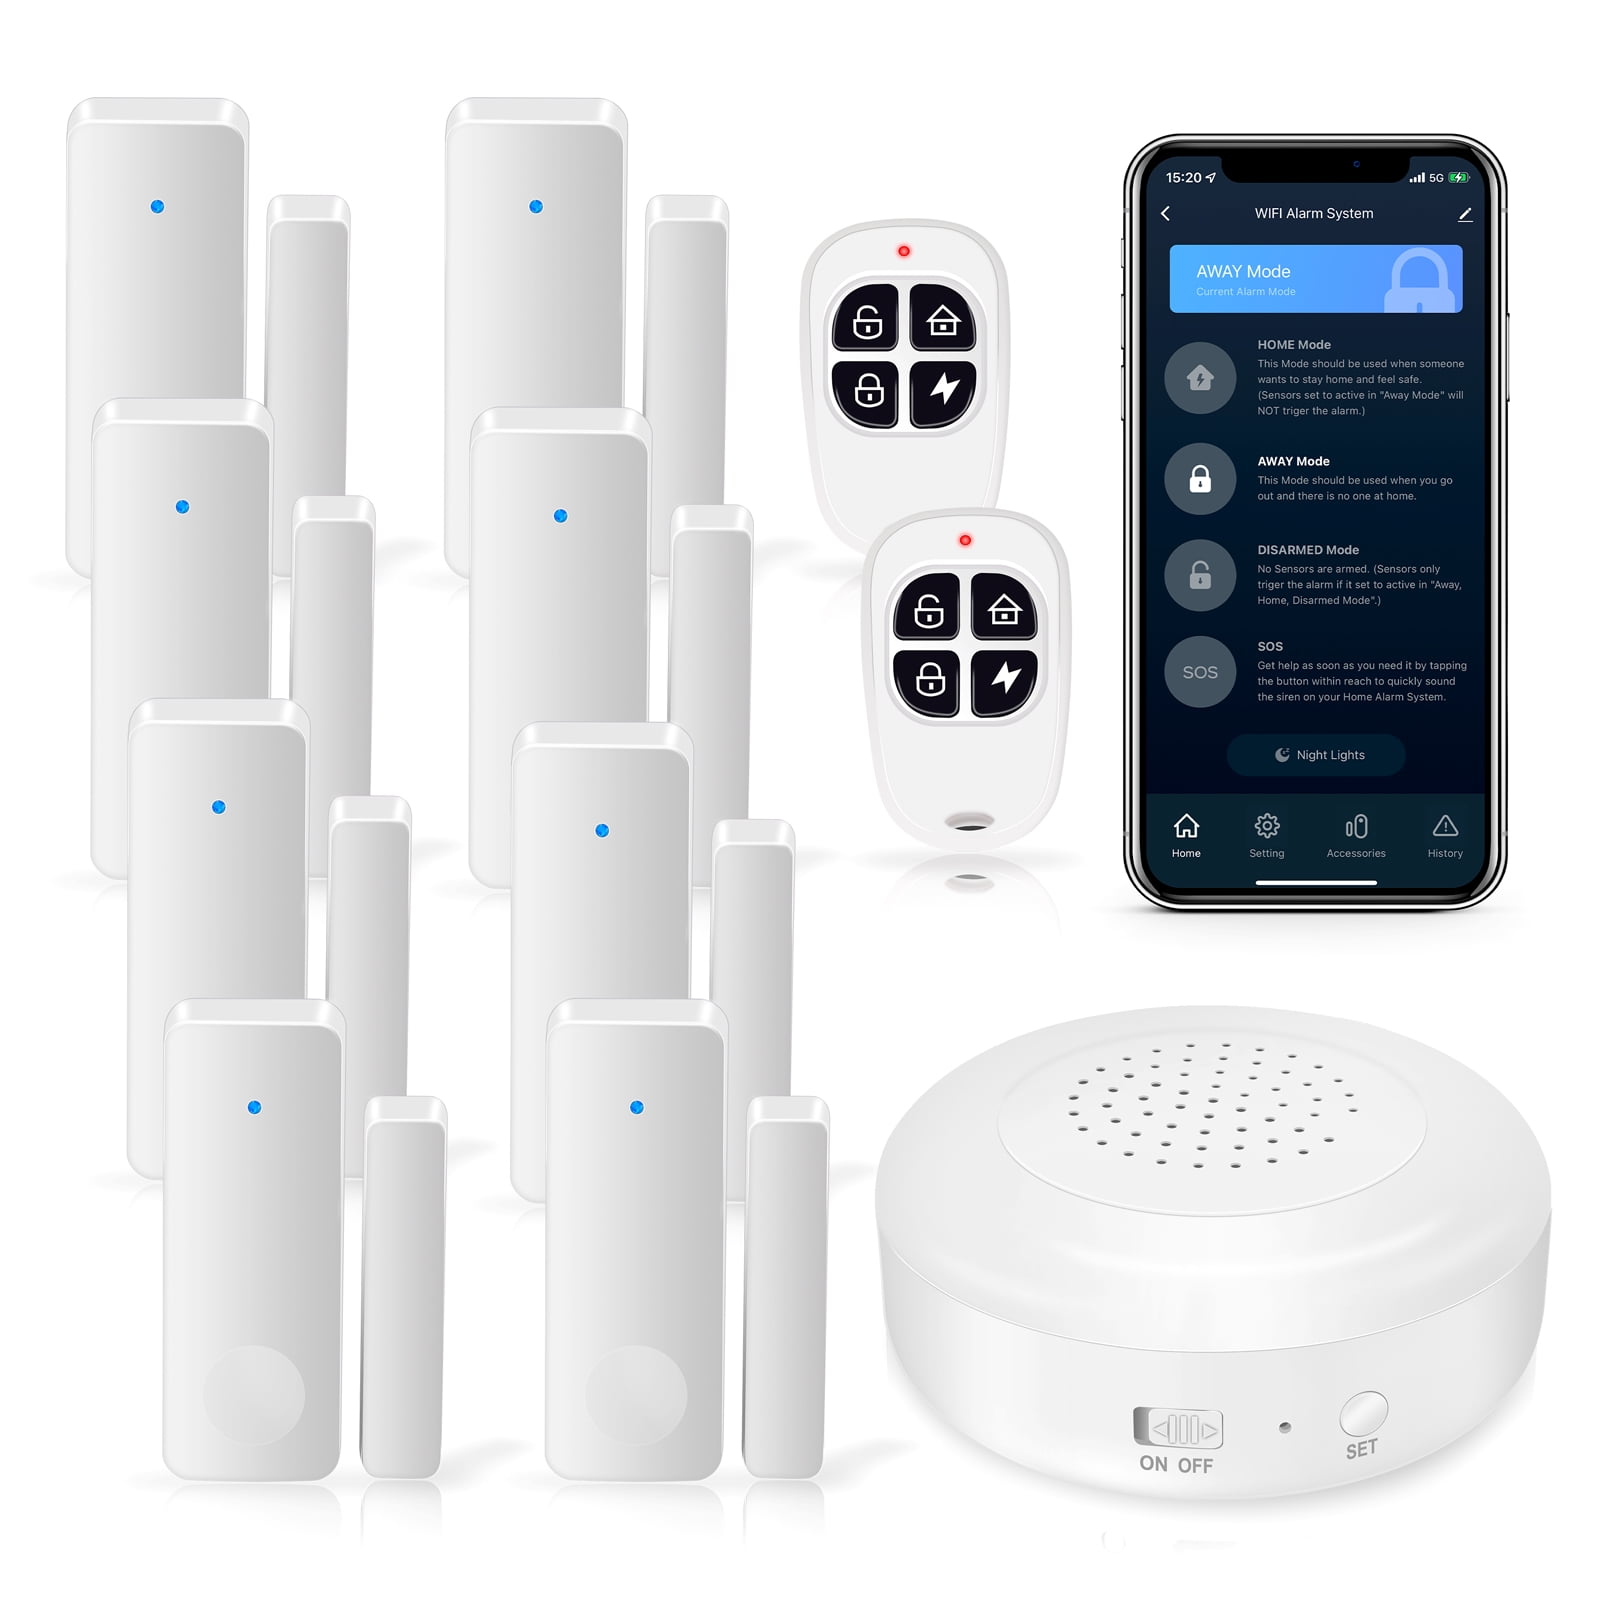 Details about   eufy 5-Pcs Wireless Alarm System Smart Home Security Kit Motion Sensor with App 